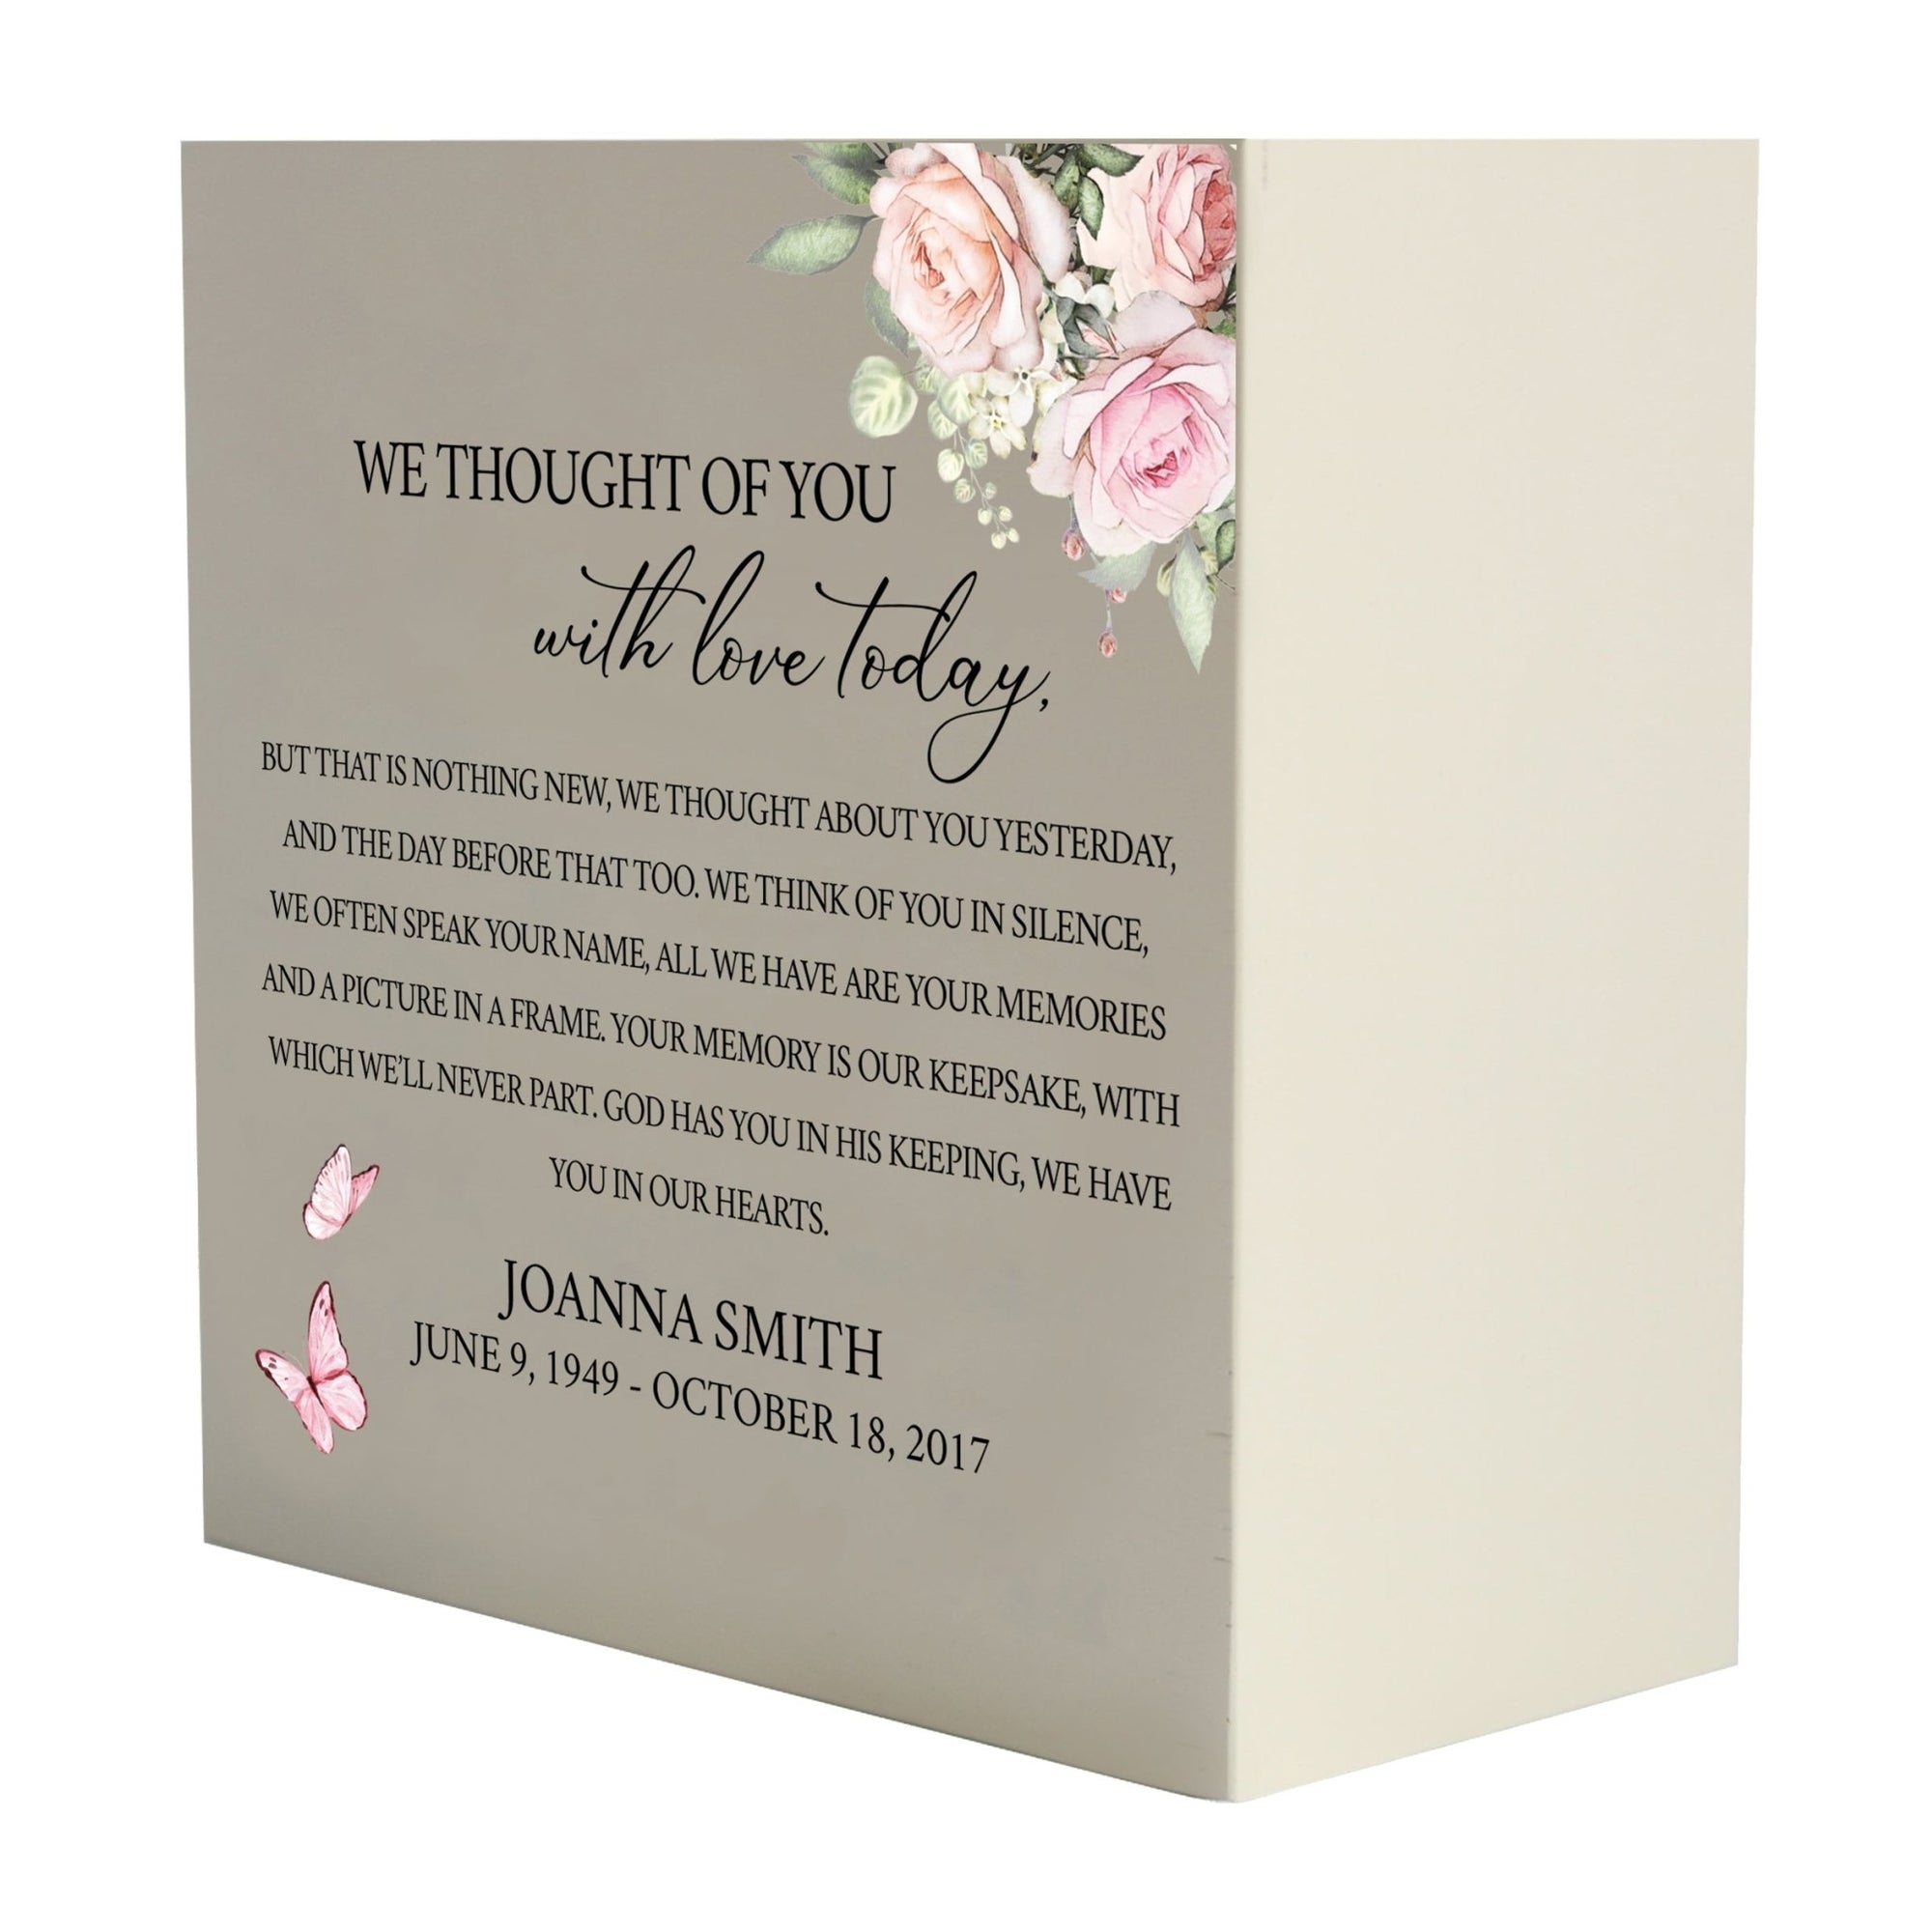 Personalized Modern Inspirational Memorial Wooden Shadow Box and Urn 6x6 holds 53 cu in of Human Ashes - We Thought Of You (Ivory) - LifeSong Milestones